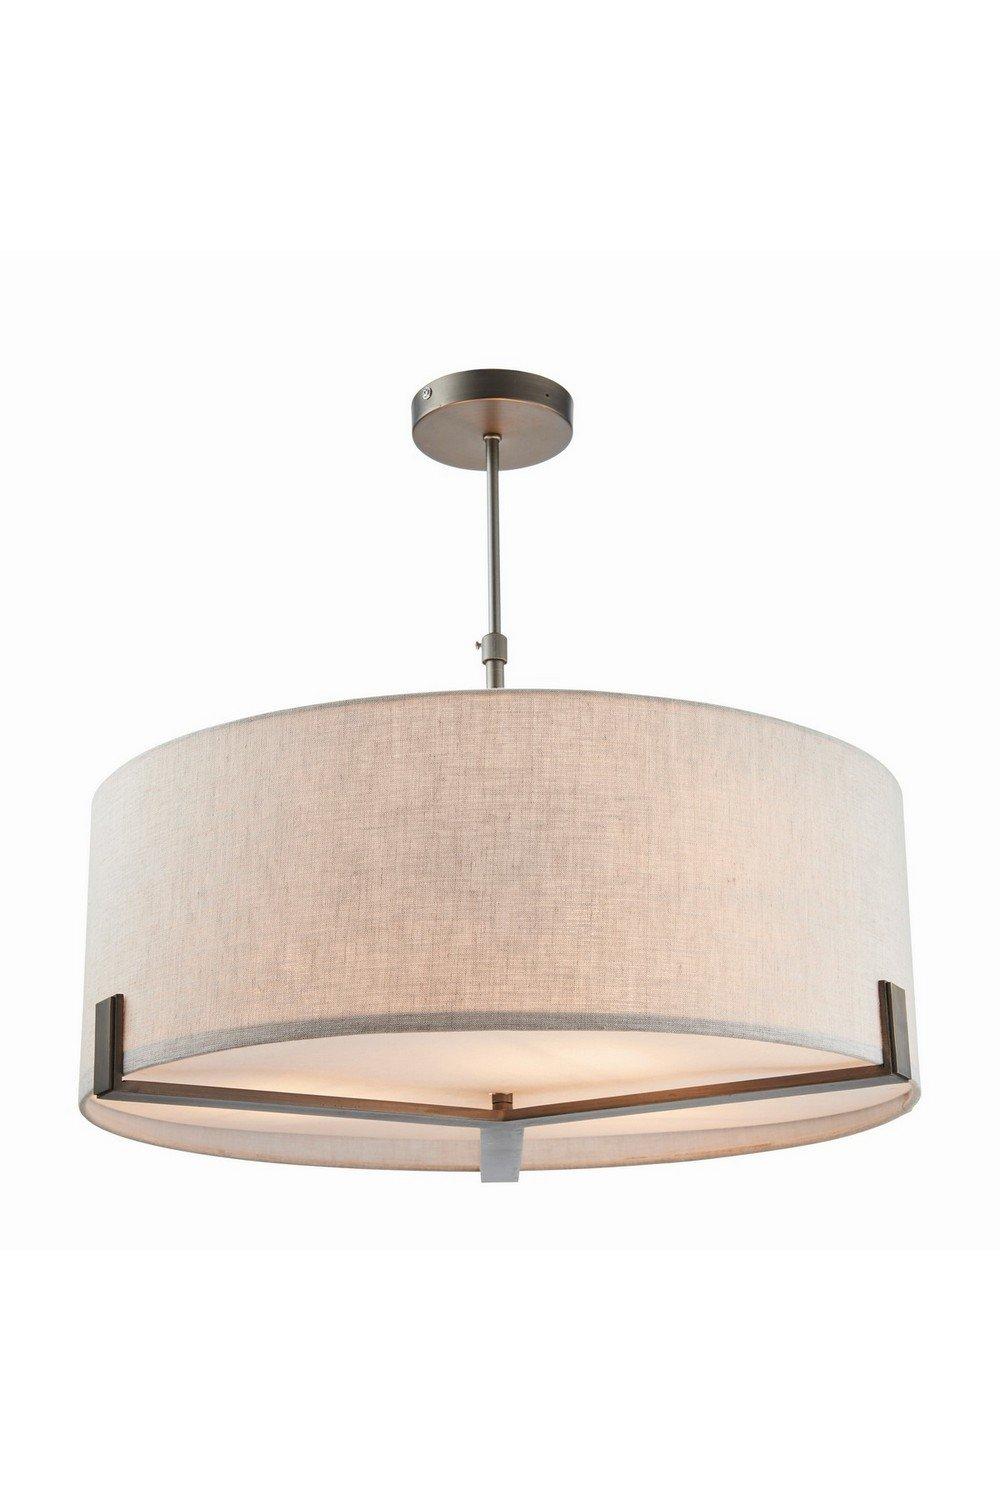 Hayfield Cylindrical Pendant Brushed Bronze Effect Plate & Natural Linen 3 Light Dimmable IP20 E27